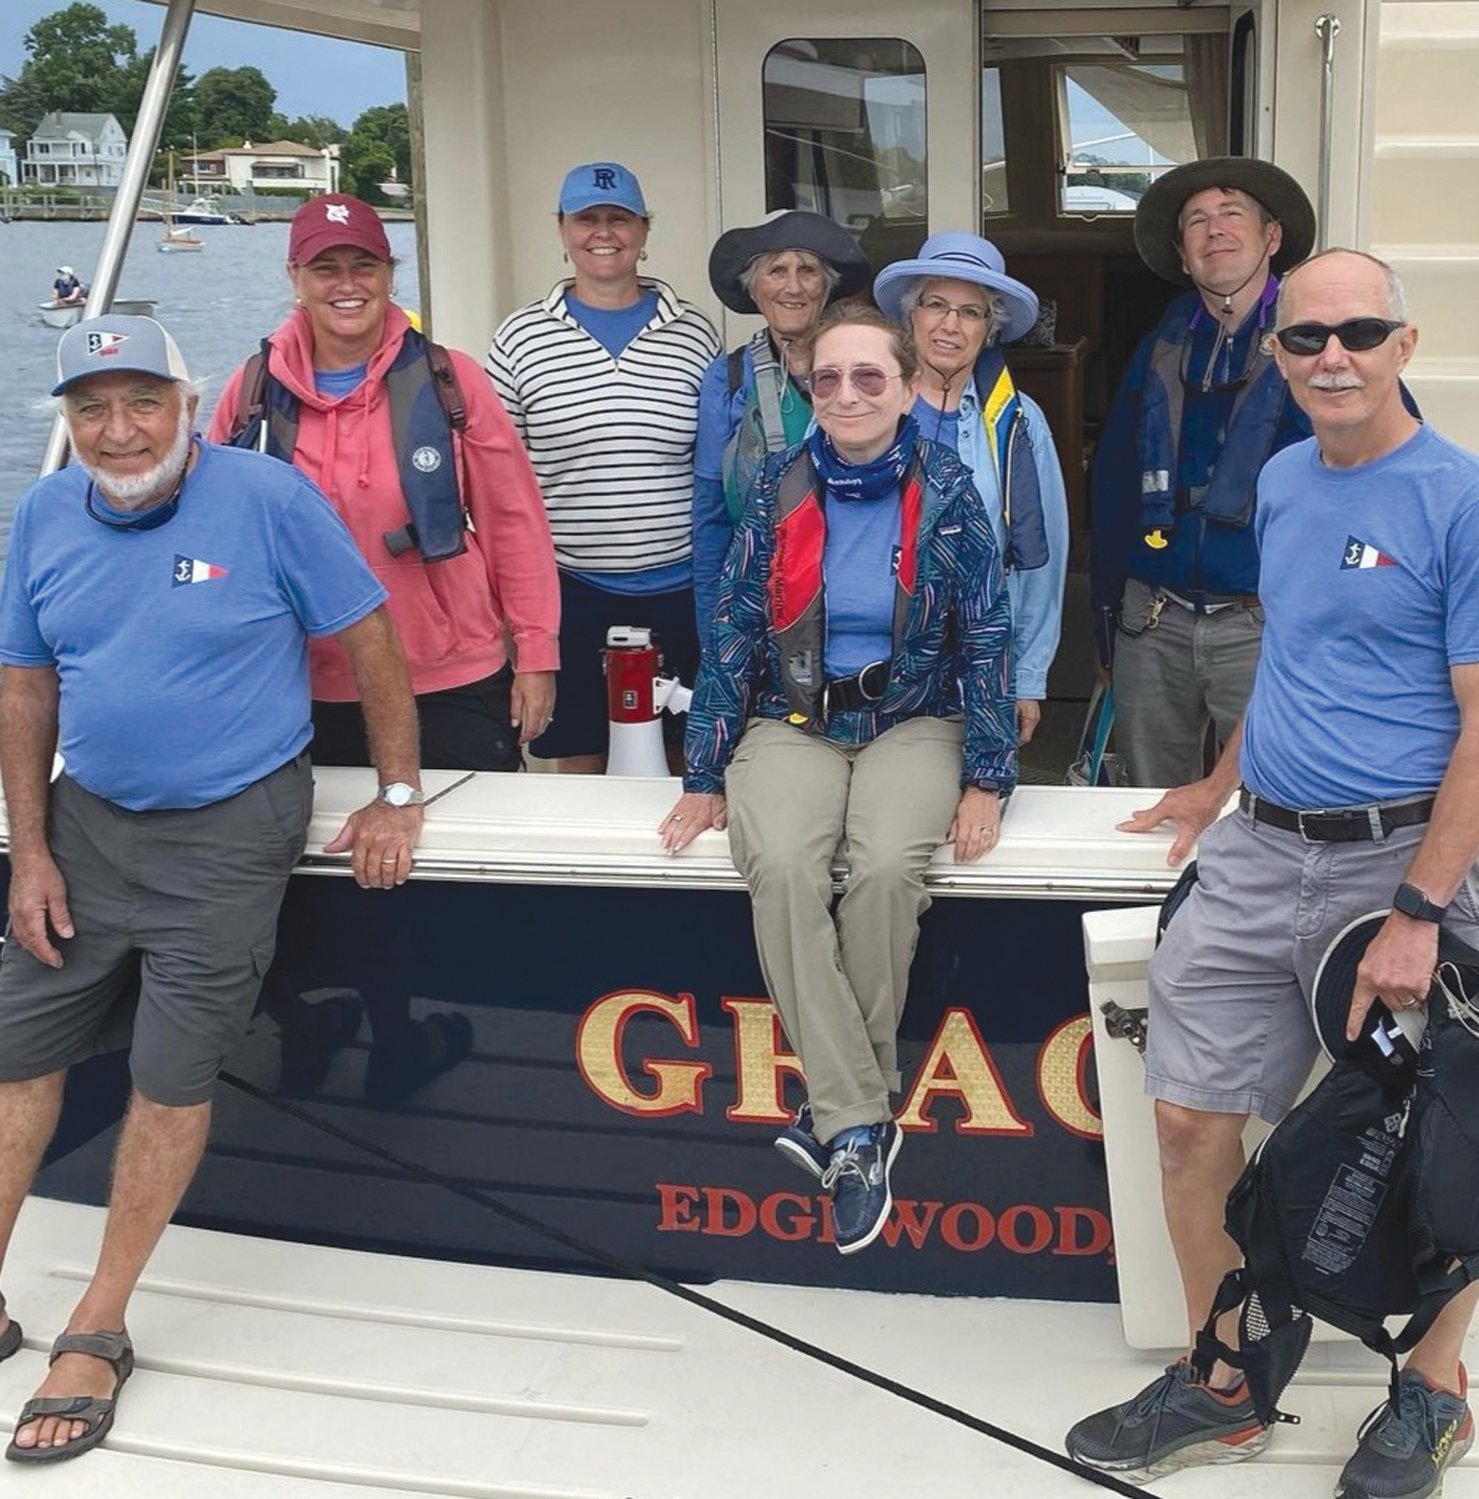 REGATTA TEAM: Pictured on the transom of the Champion Fleet race committee boat are Paul Thomas, Kirsten Small, Donna Fraser, Anne Pearson, Catherine White, Betty Paroli, Stuart Malone, and Principal Race Officer for the RWB/Championship Fleet Chris Lee.